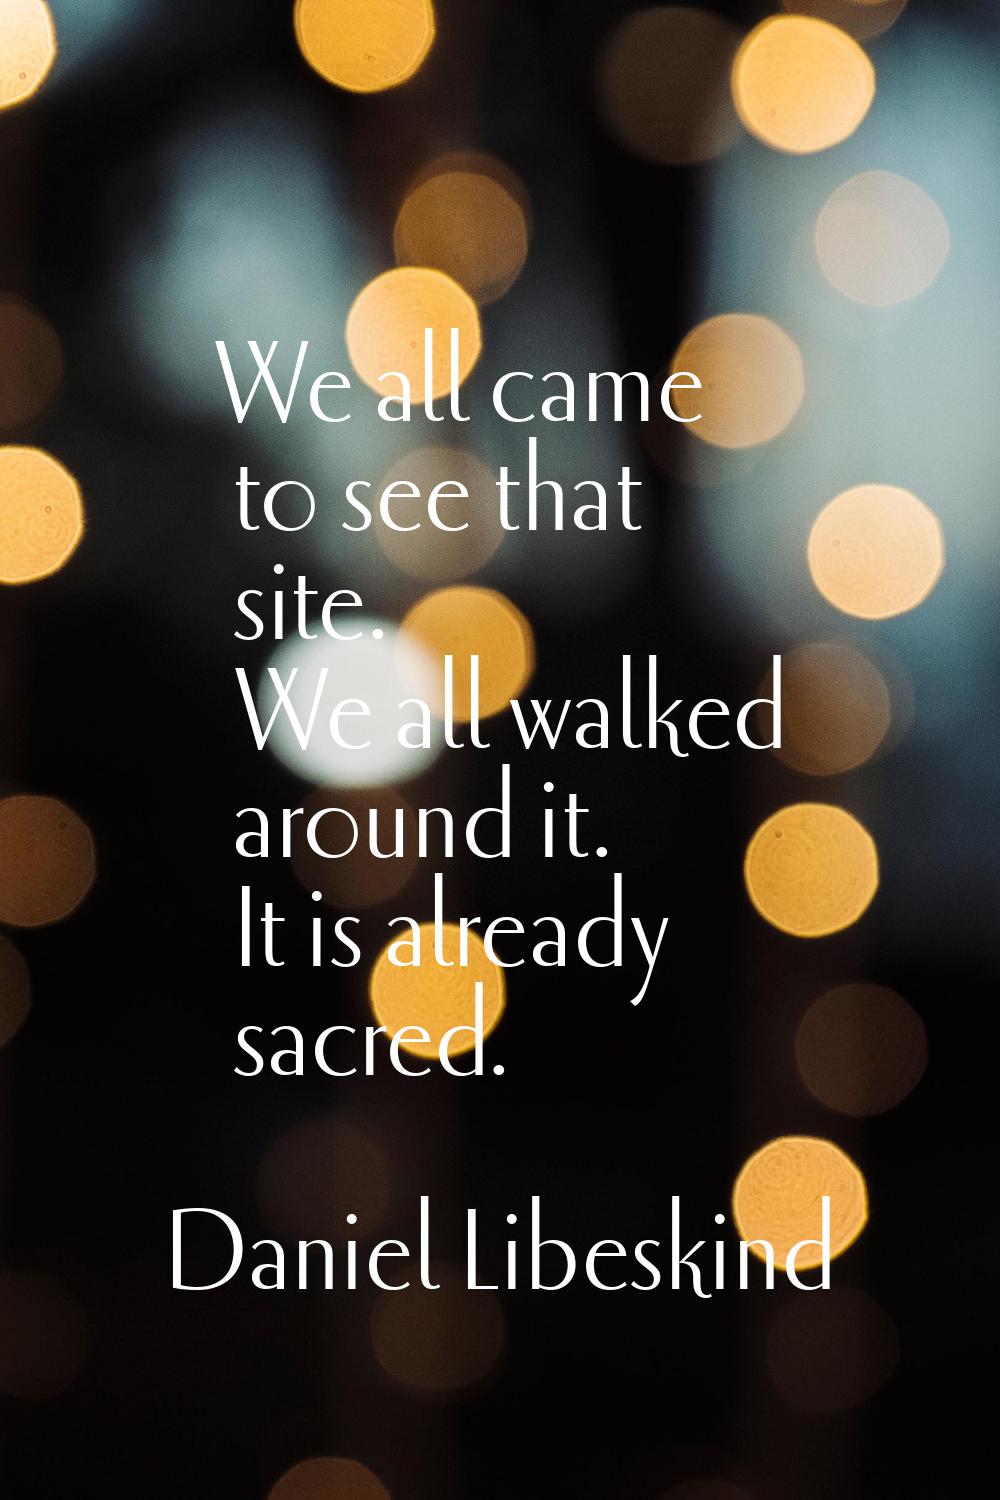 We all came to see that site. We all walked around it. It is already sacred.